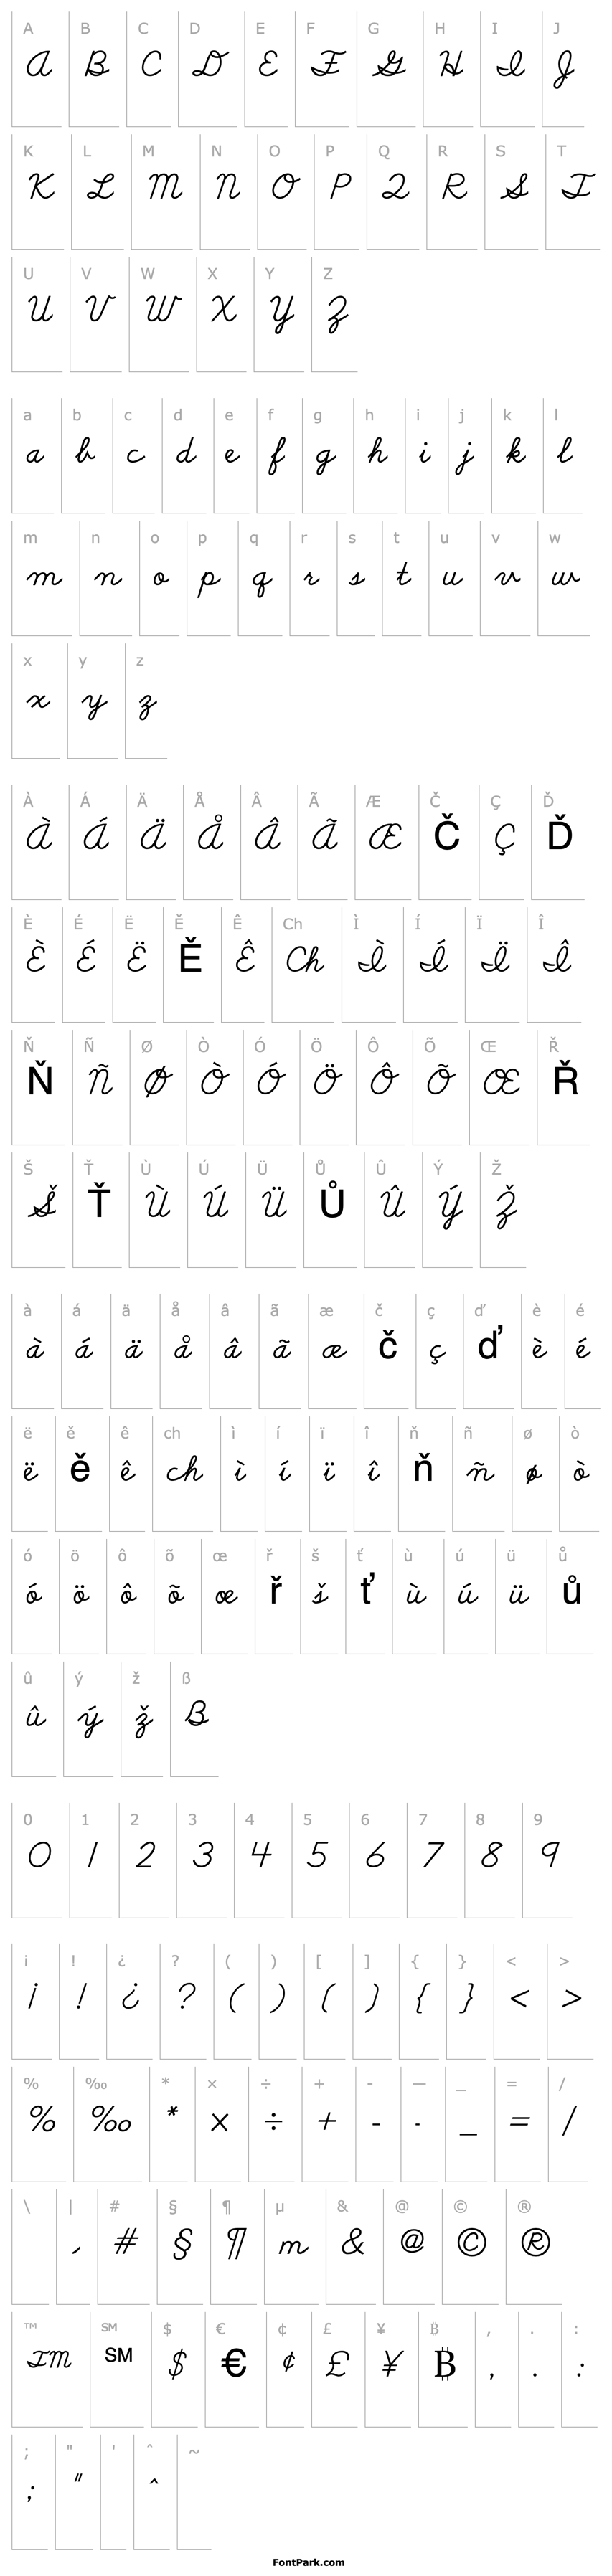 Přehled SchoolScript